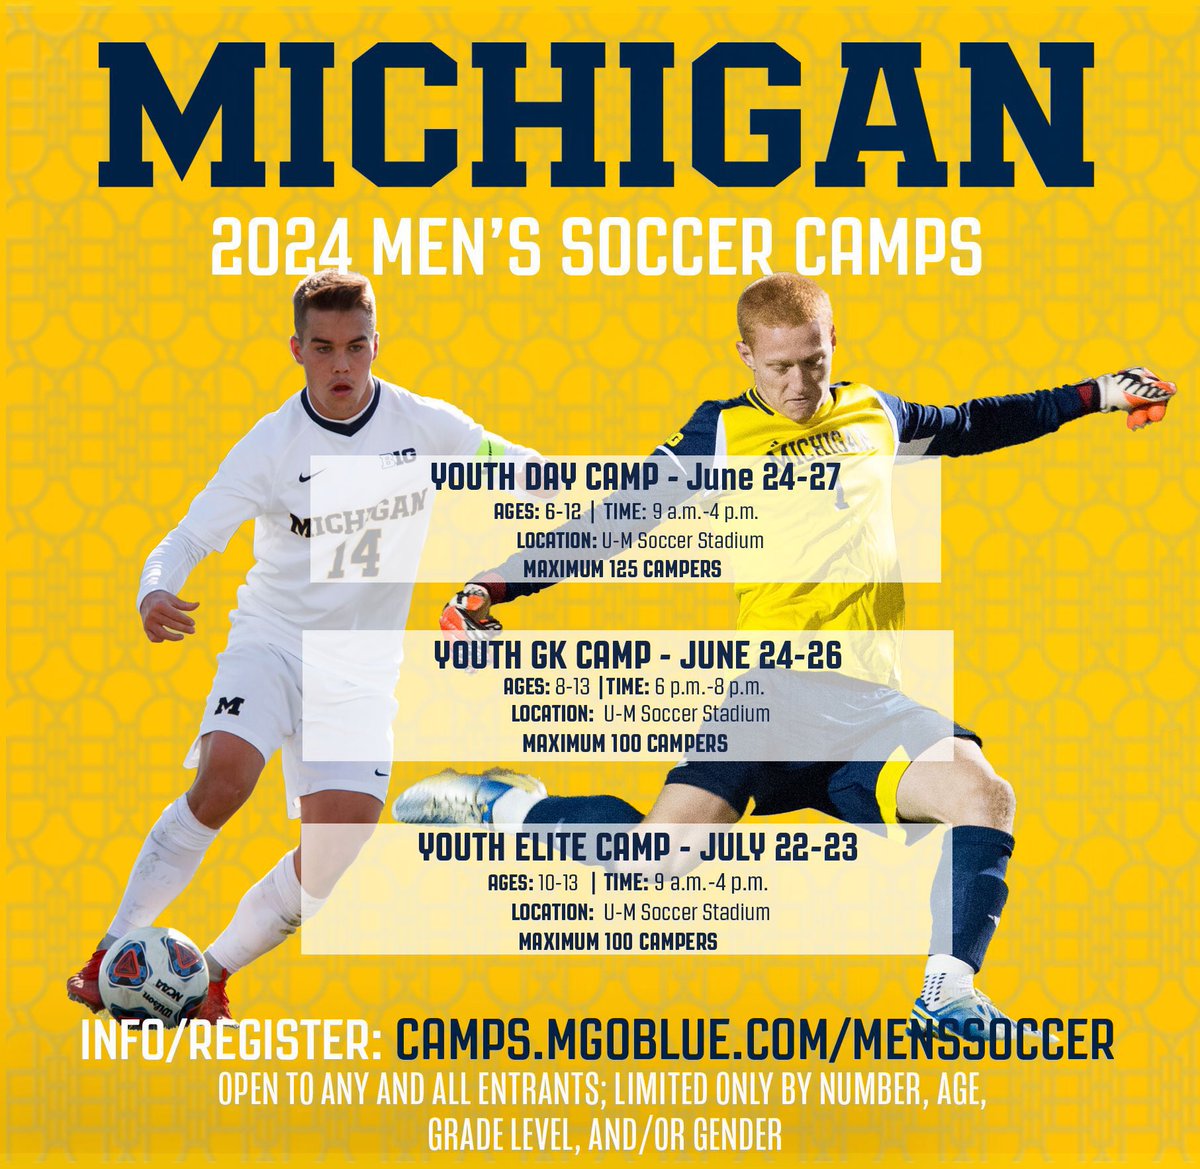 As the weather warms up in Michigan - don't forget about summer camp registration! #GoBlue 〽️